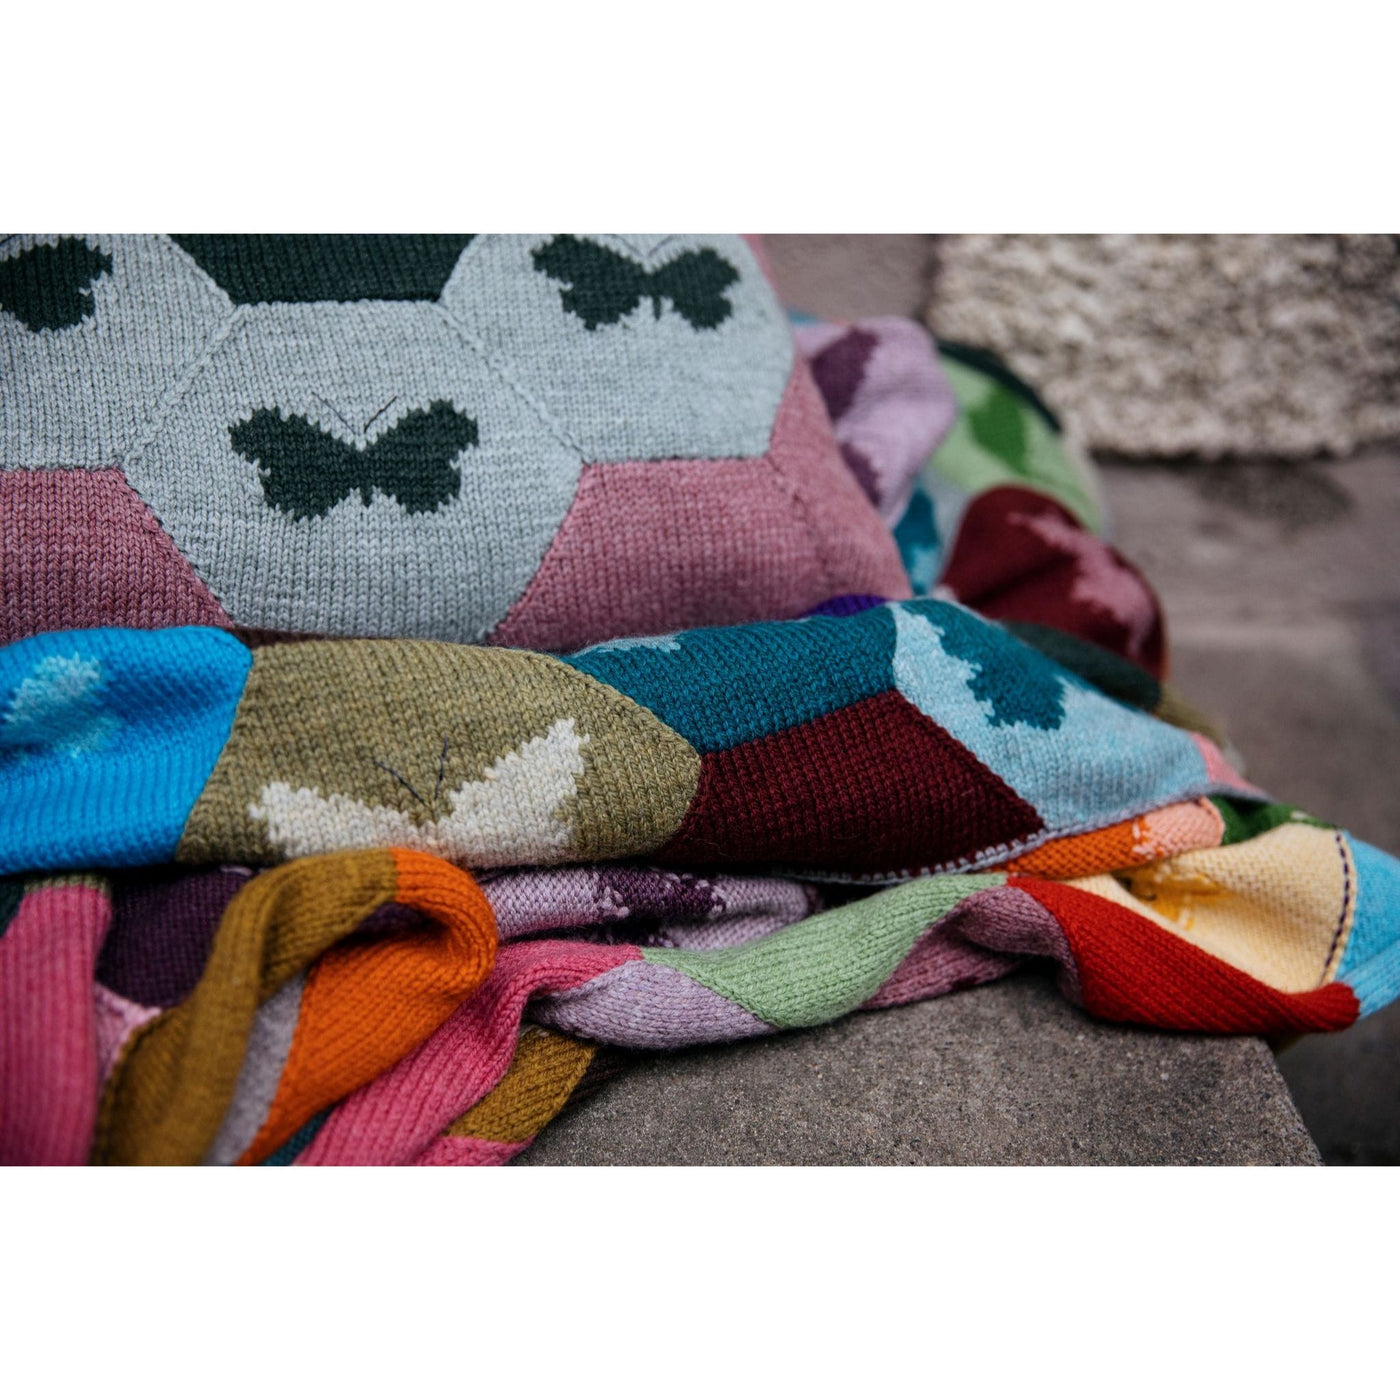 Page from The Knitted Fabric by Dee Hardwicke showing a pillow and blanket with hexagons and butterflies in multiple colors